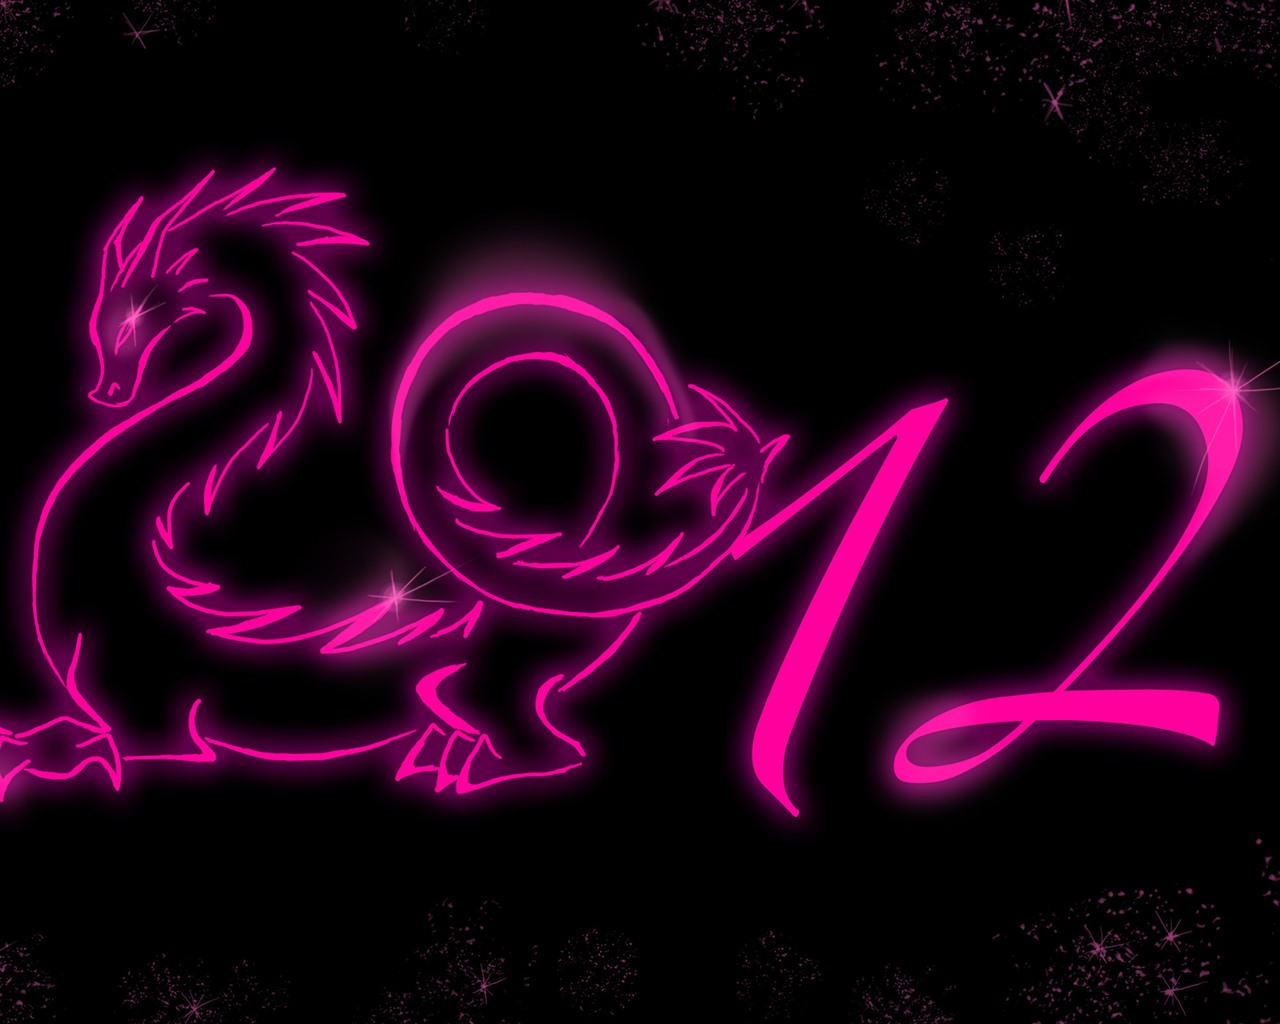 2012 New Year wallpapers (1) #16 - 1280x1024